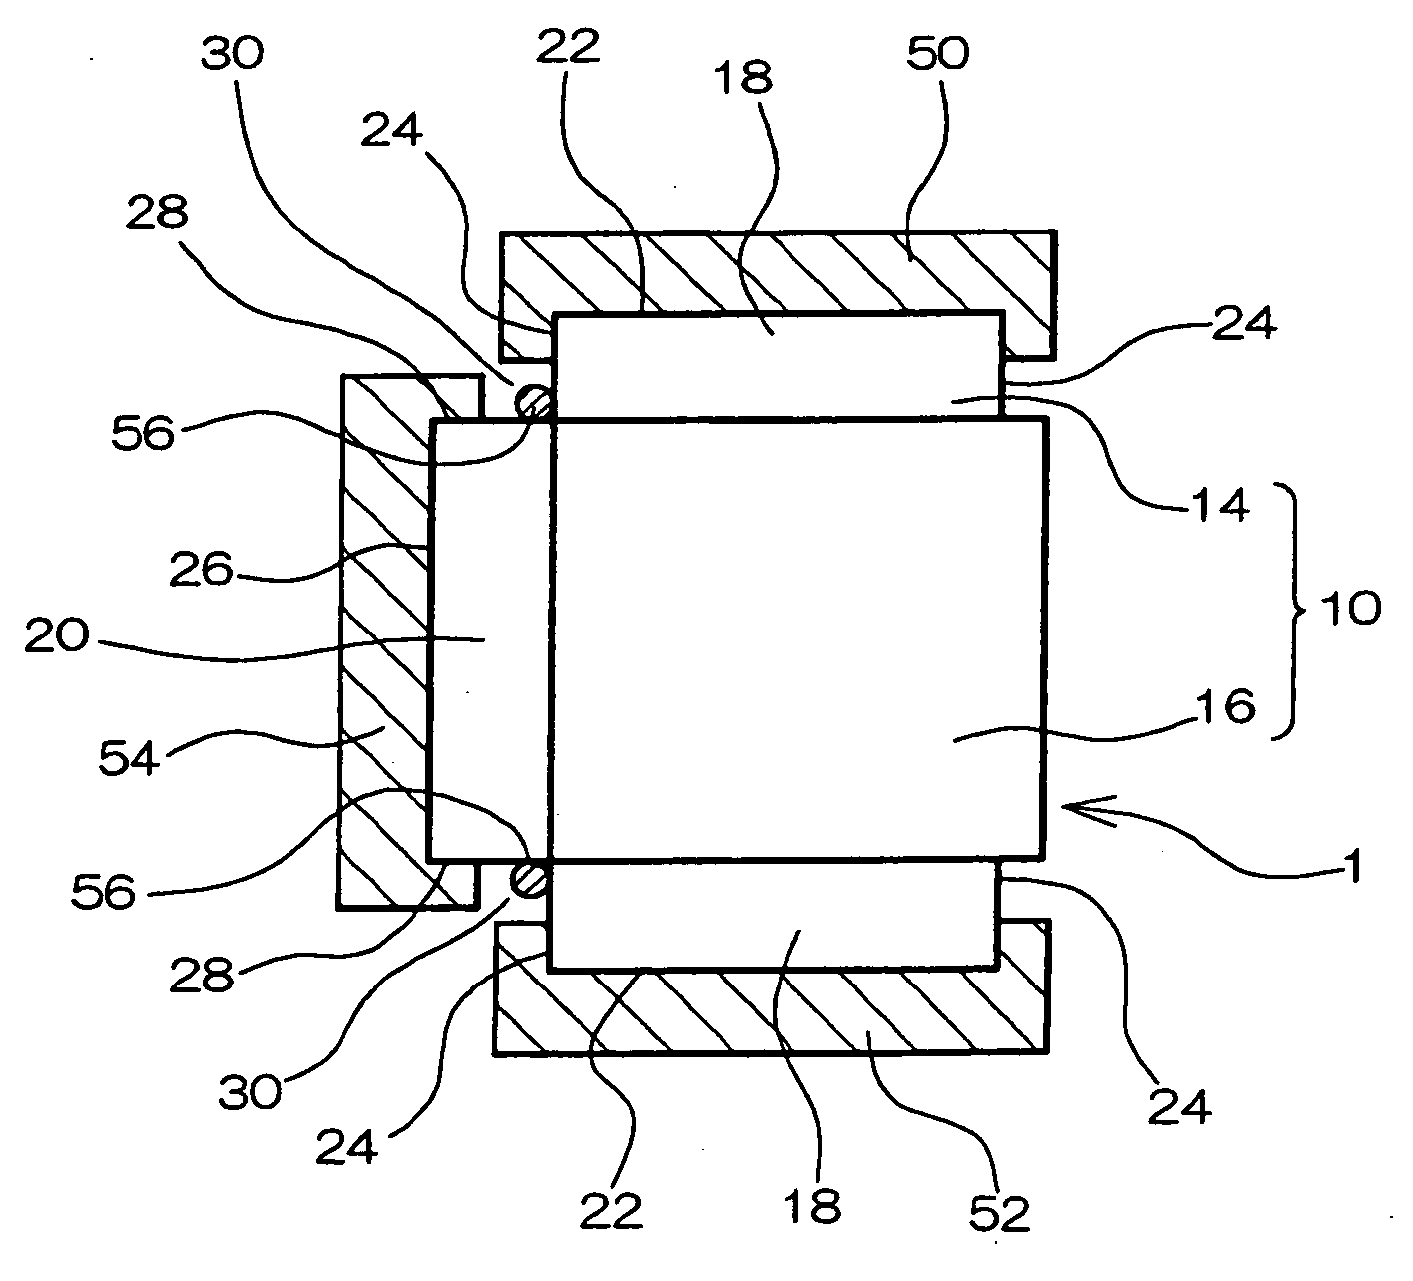 Interconnect substrate, semiconductor device, methods of fabricating, inspecting, and mounting the semiconductor device, circuit board, and electronic instrument